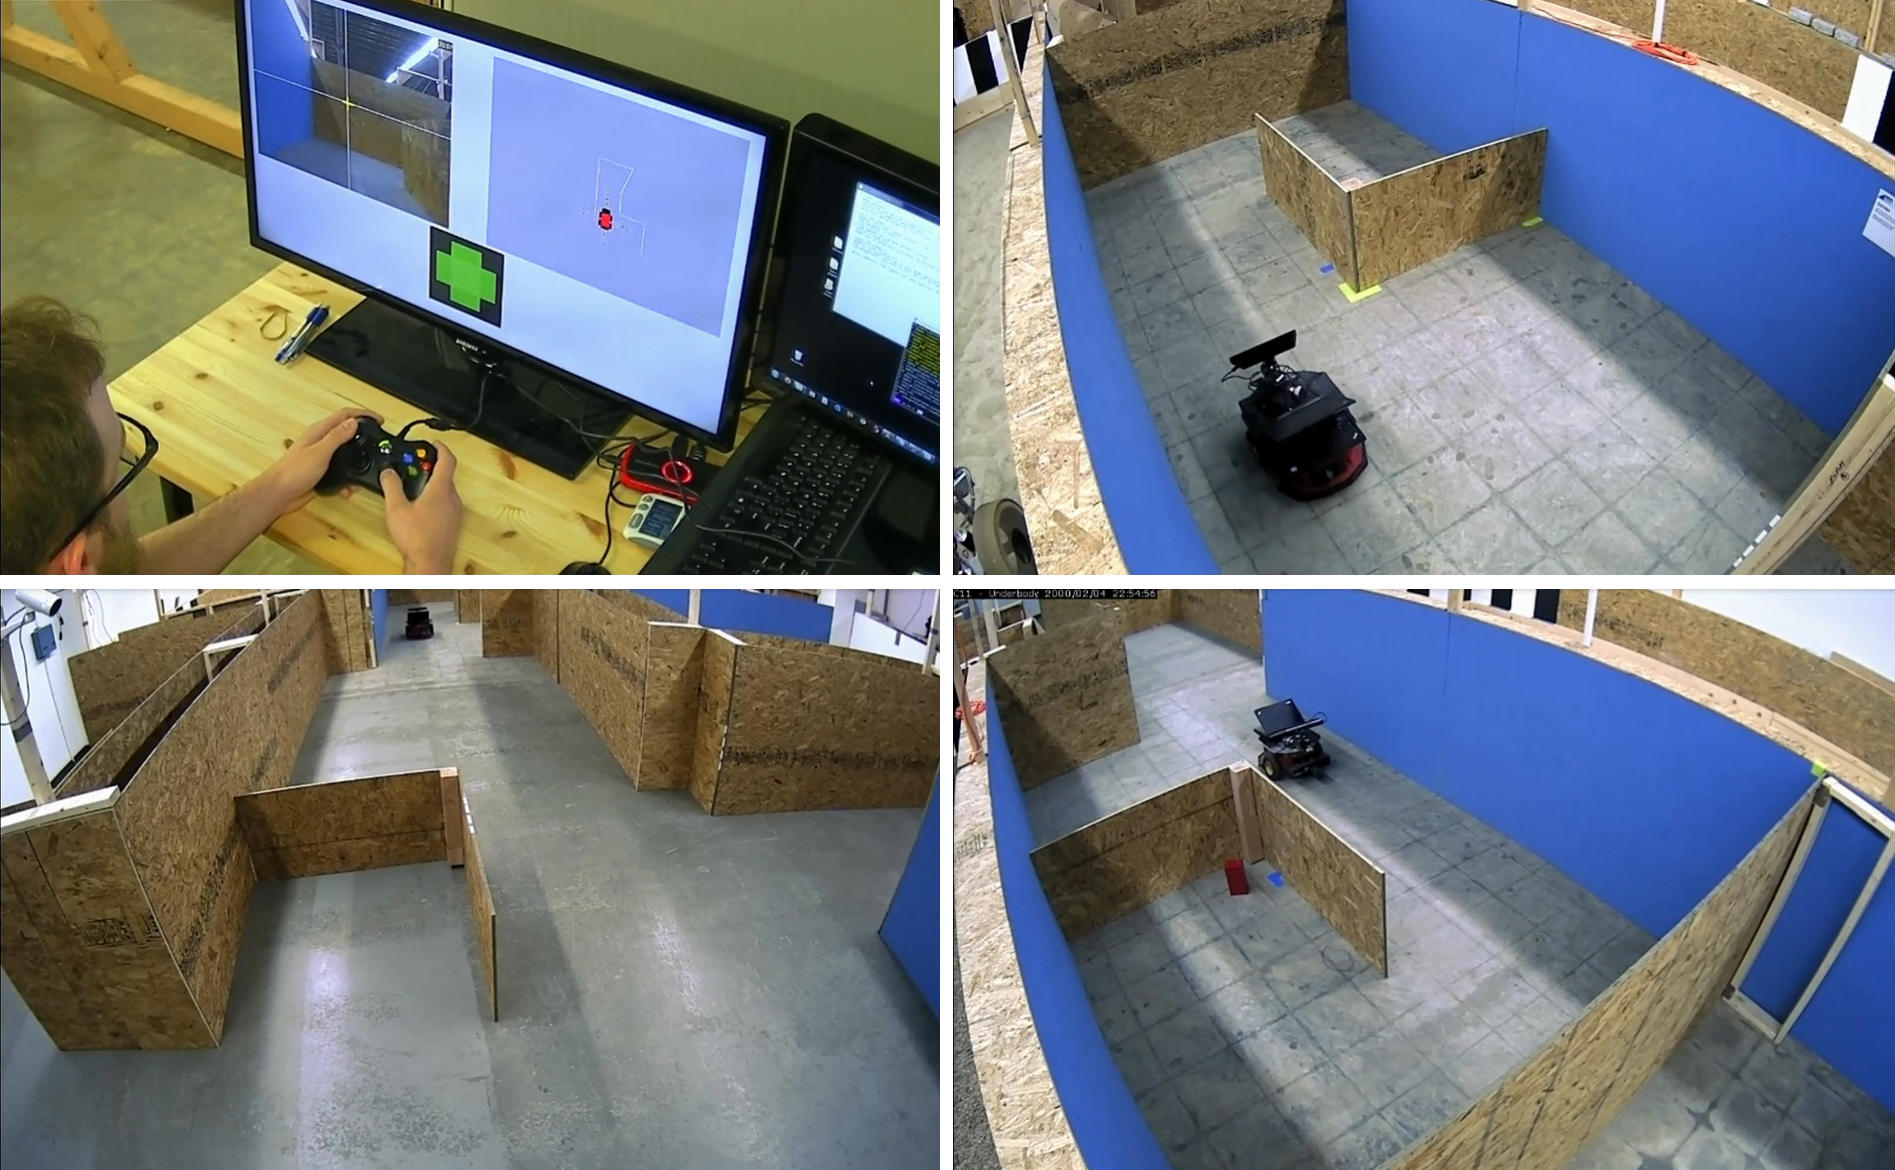 Investigation of Multiple Resource Theory Design Principles on Robot Teleoperation and Workload Management